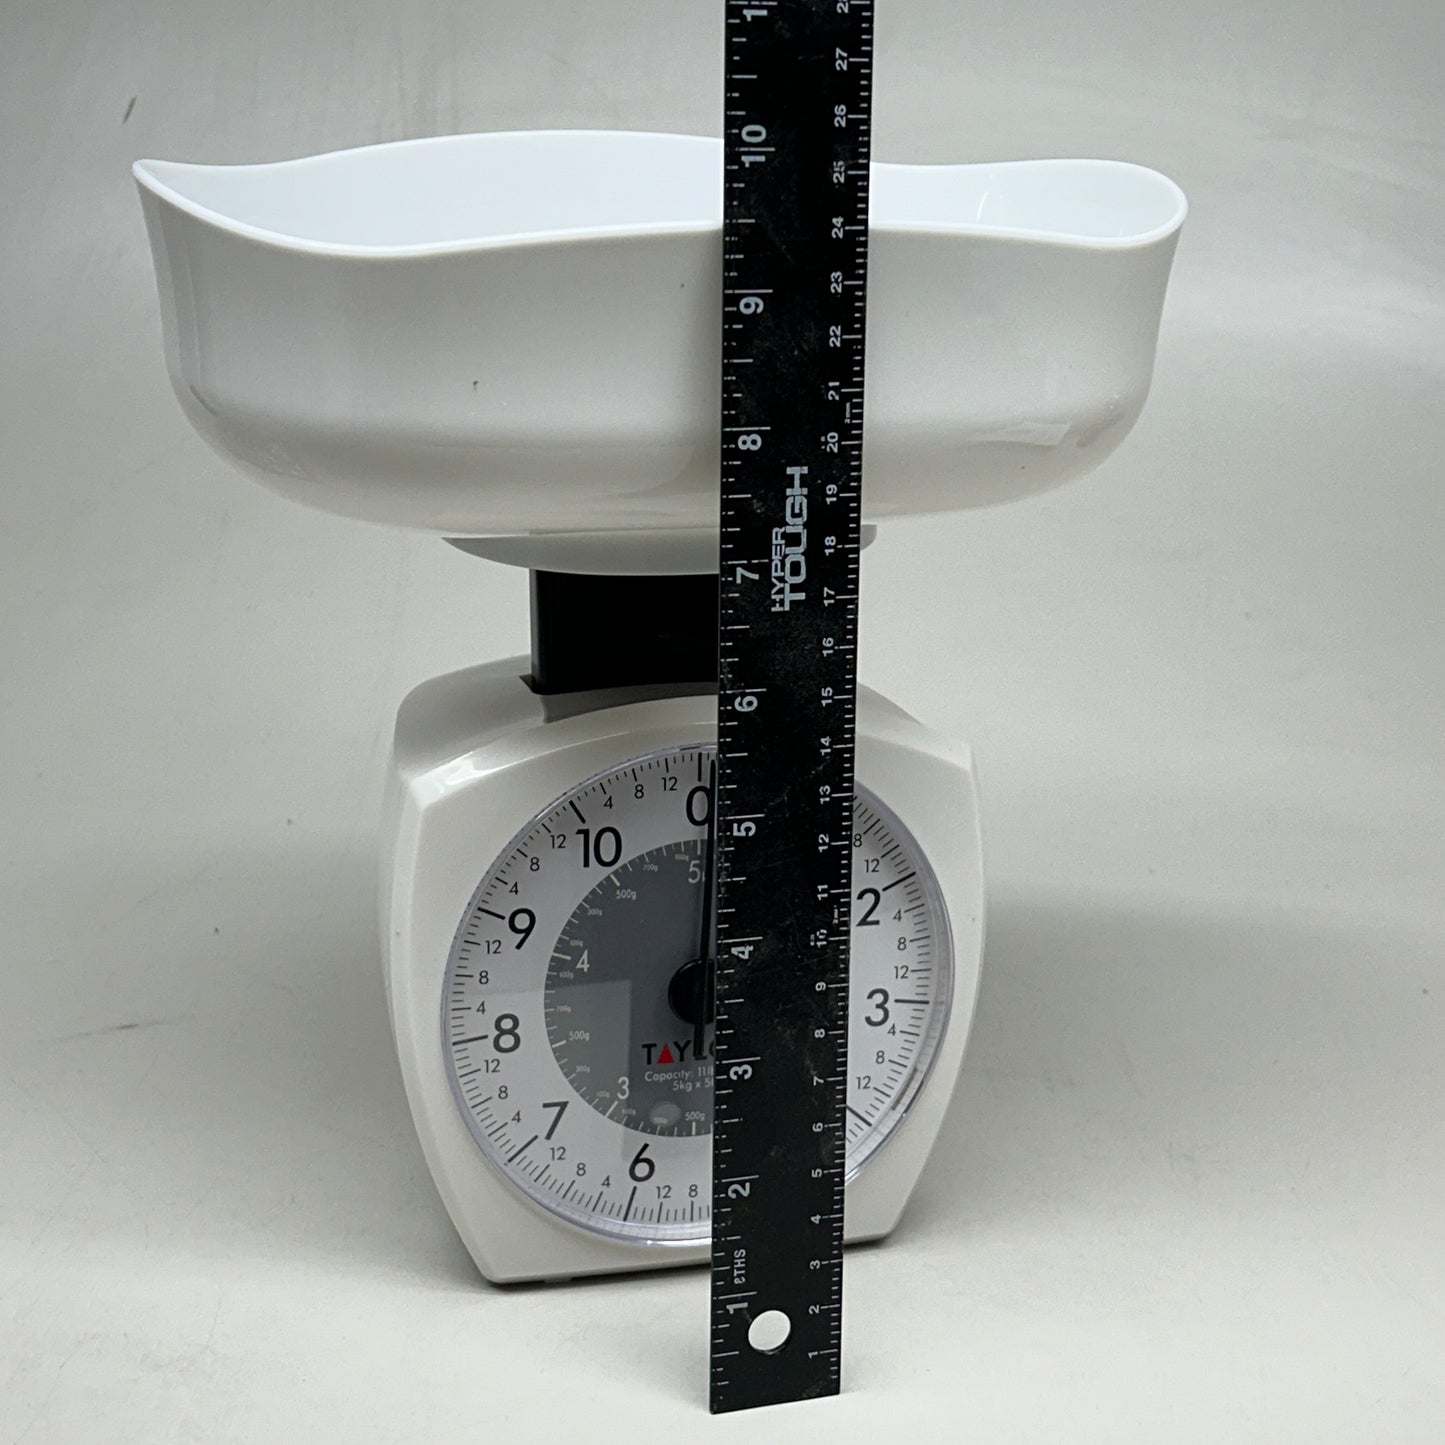 TAYLOR Mechanical Food Scale White 3701KL (New)